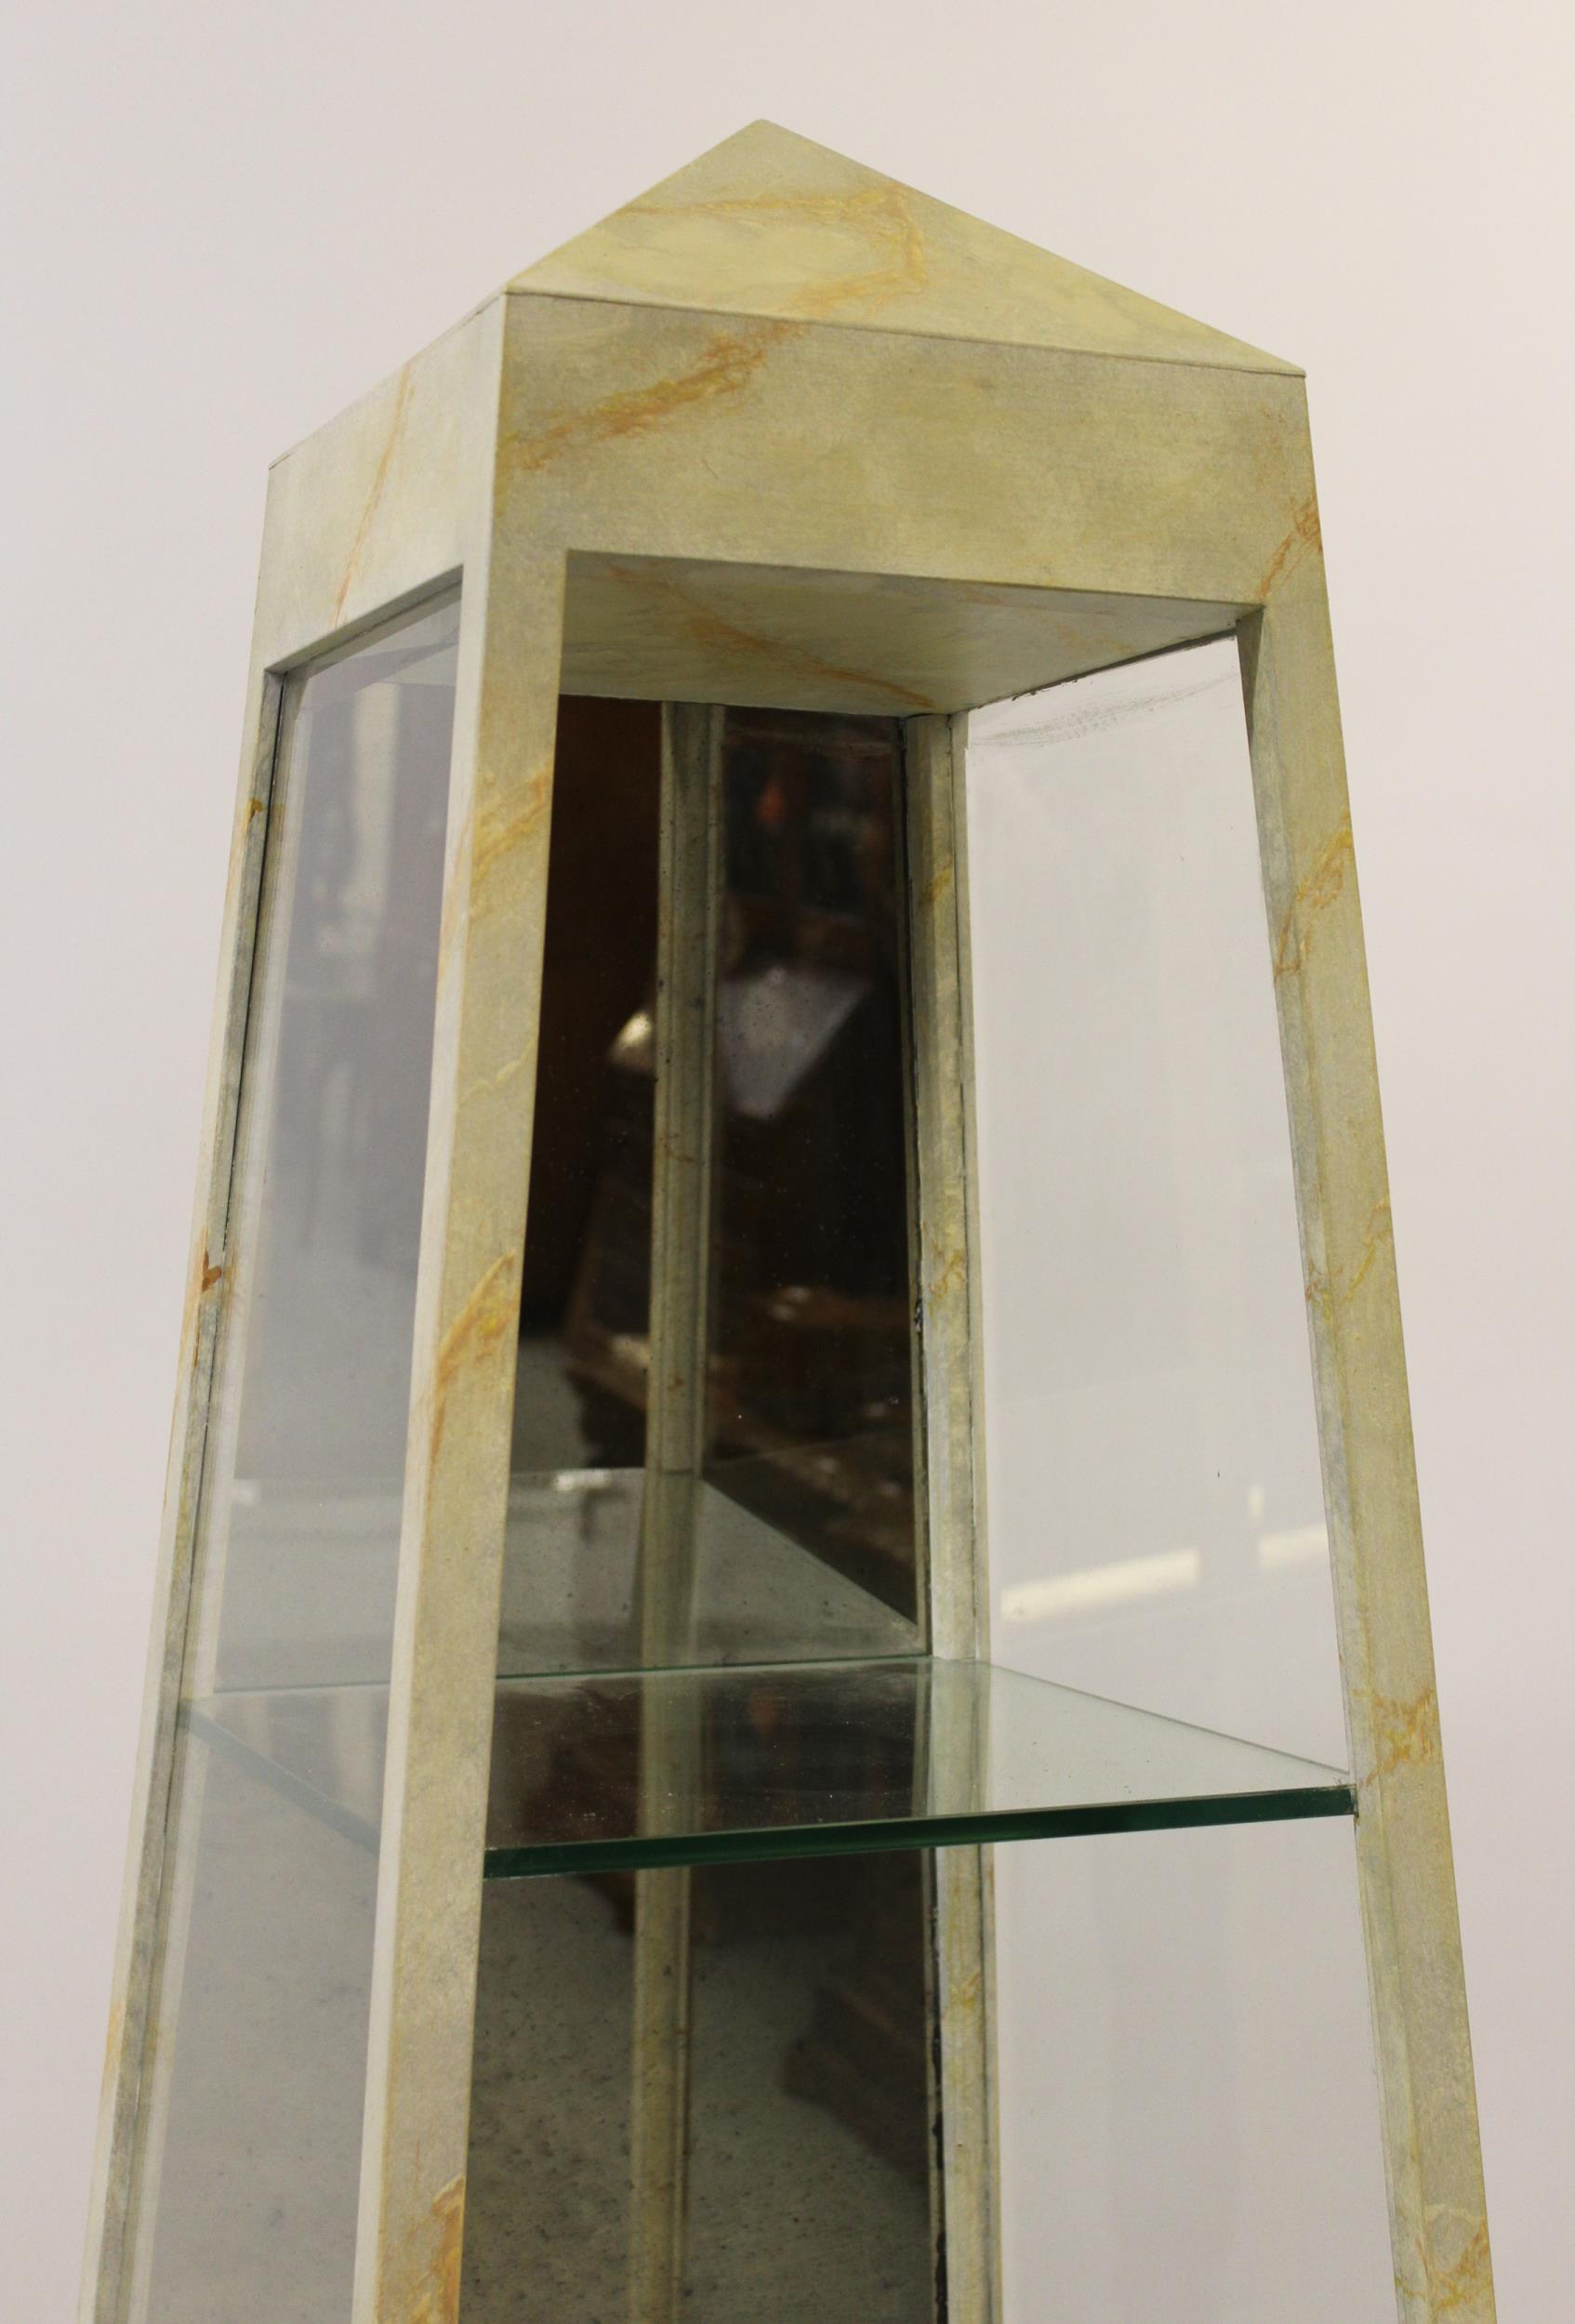 Pair of modern painted obelisk form display cabinets with plinth bases to match and marbled - Image 3 of 3